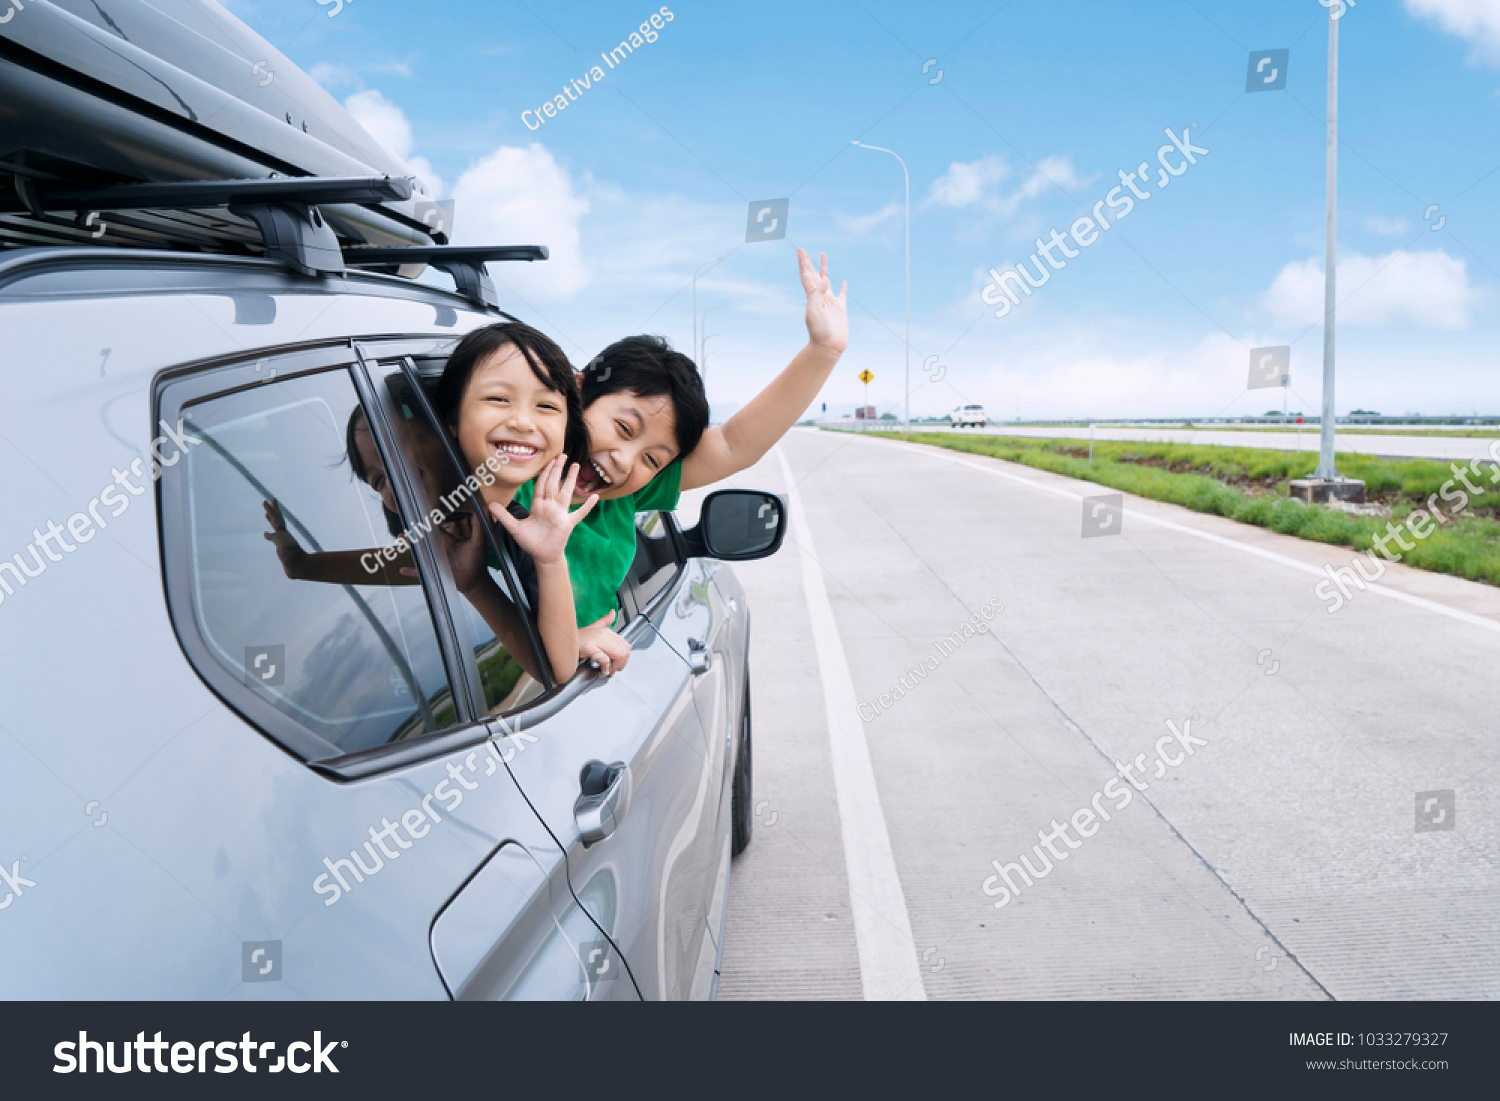 Happy siblings waving hands travel by car against blue sky. Summer road trip concept #1033279327